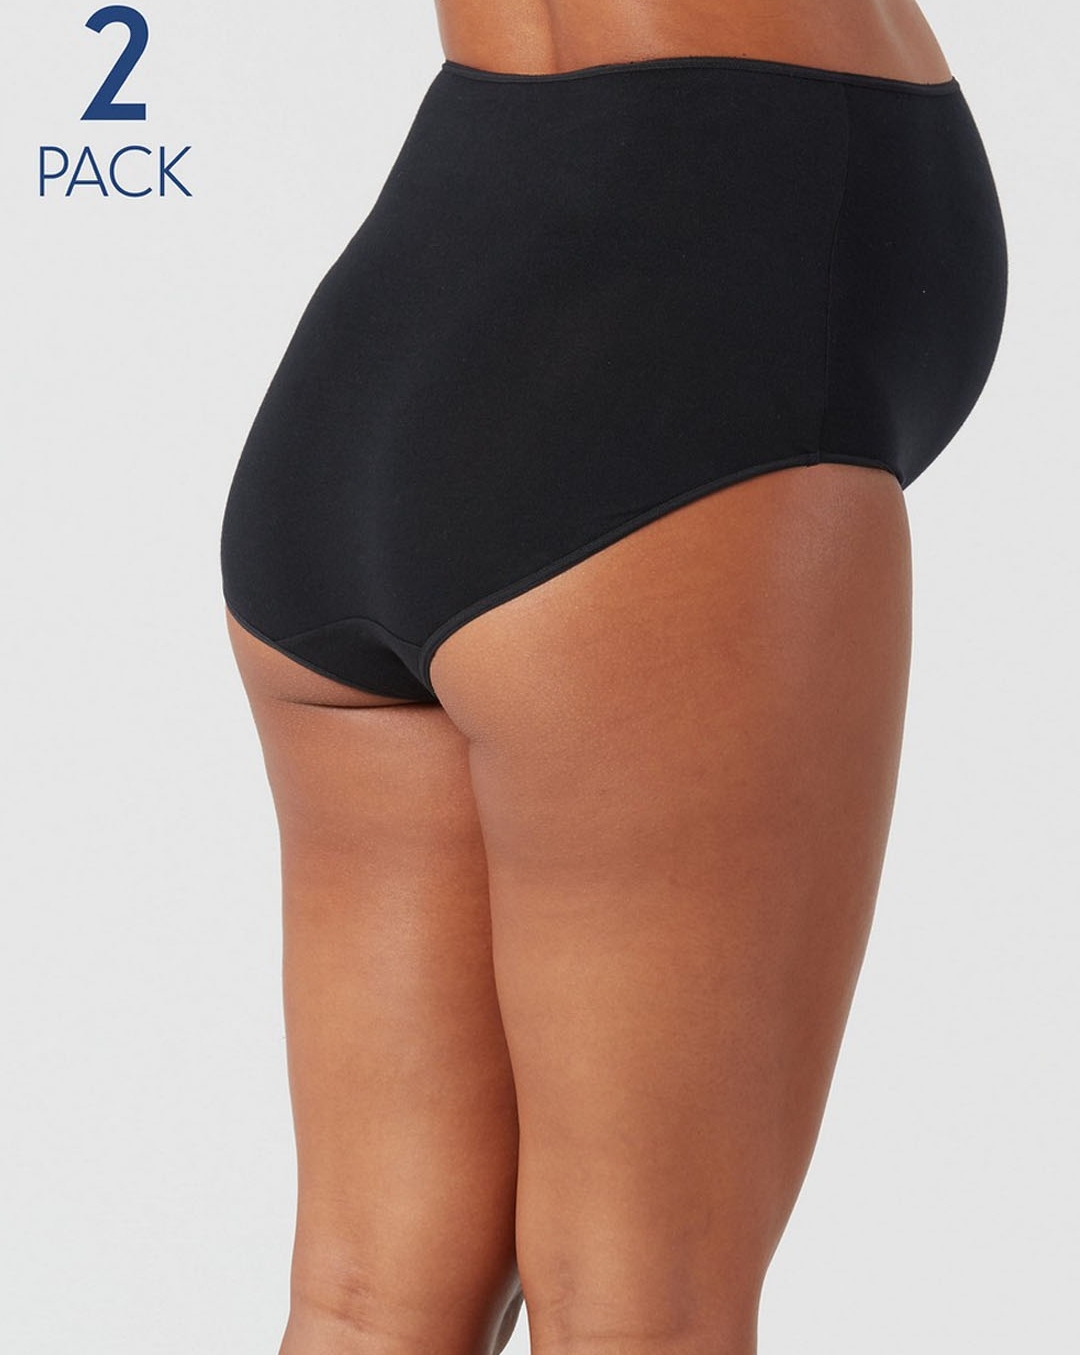 Buy Maternity Over The Bump Briefs - 2 Pack Online at Best Price